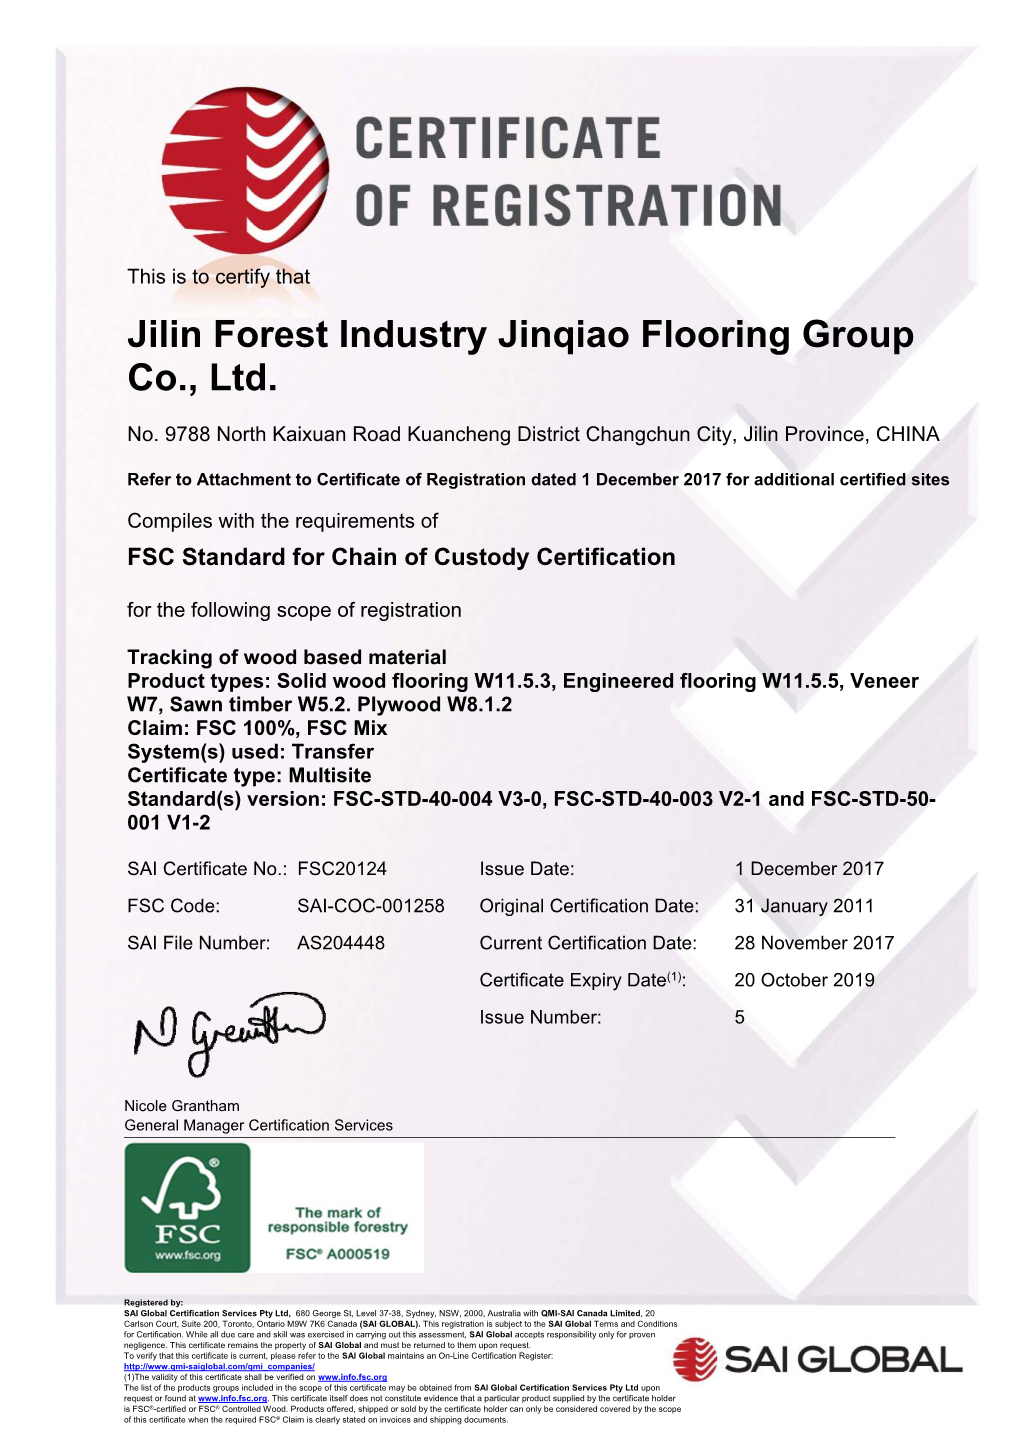 Jilin Forest Industry Jinqiao Flooring Group Co., Ltd